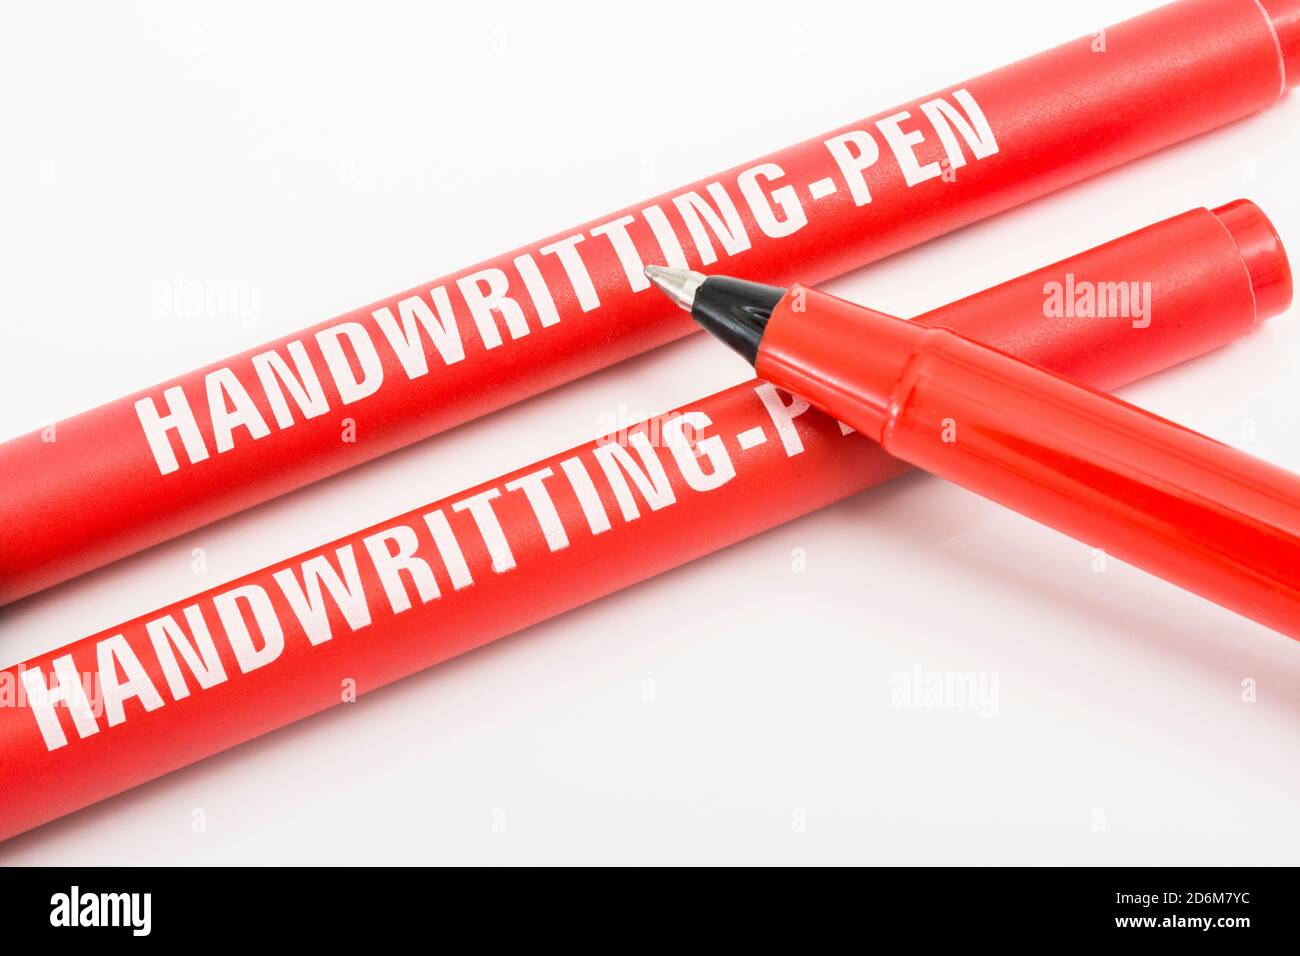 Own-brand Poundland roller pens with word 'handwriting' misspelled